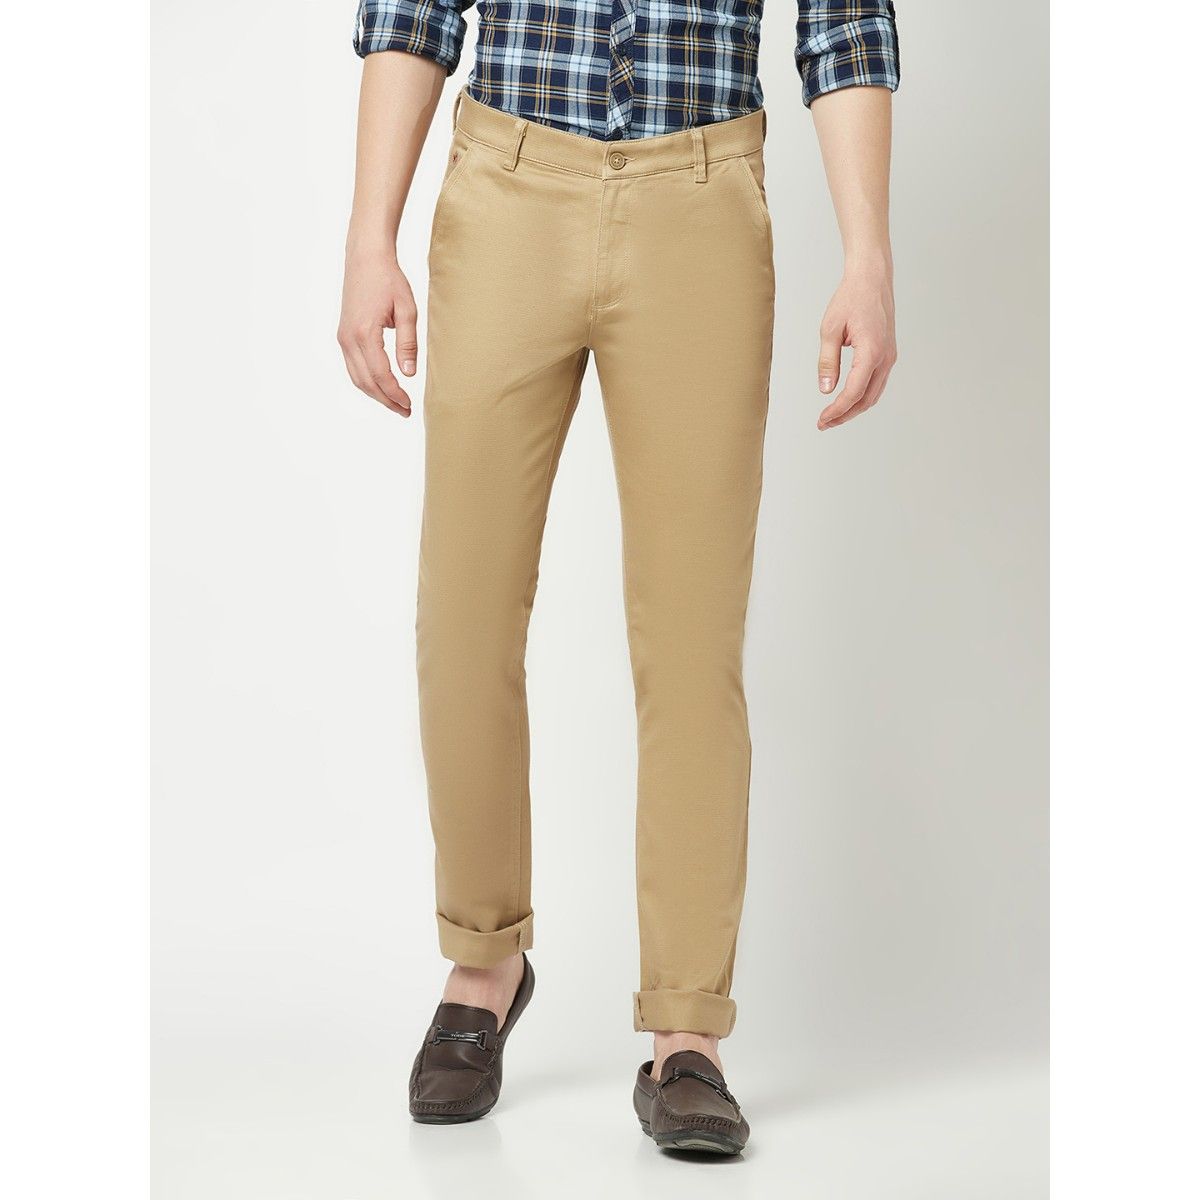 Buy CRIMSOUNE CLUB Mens Solid Brown Chinos Trousers online